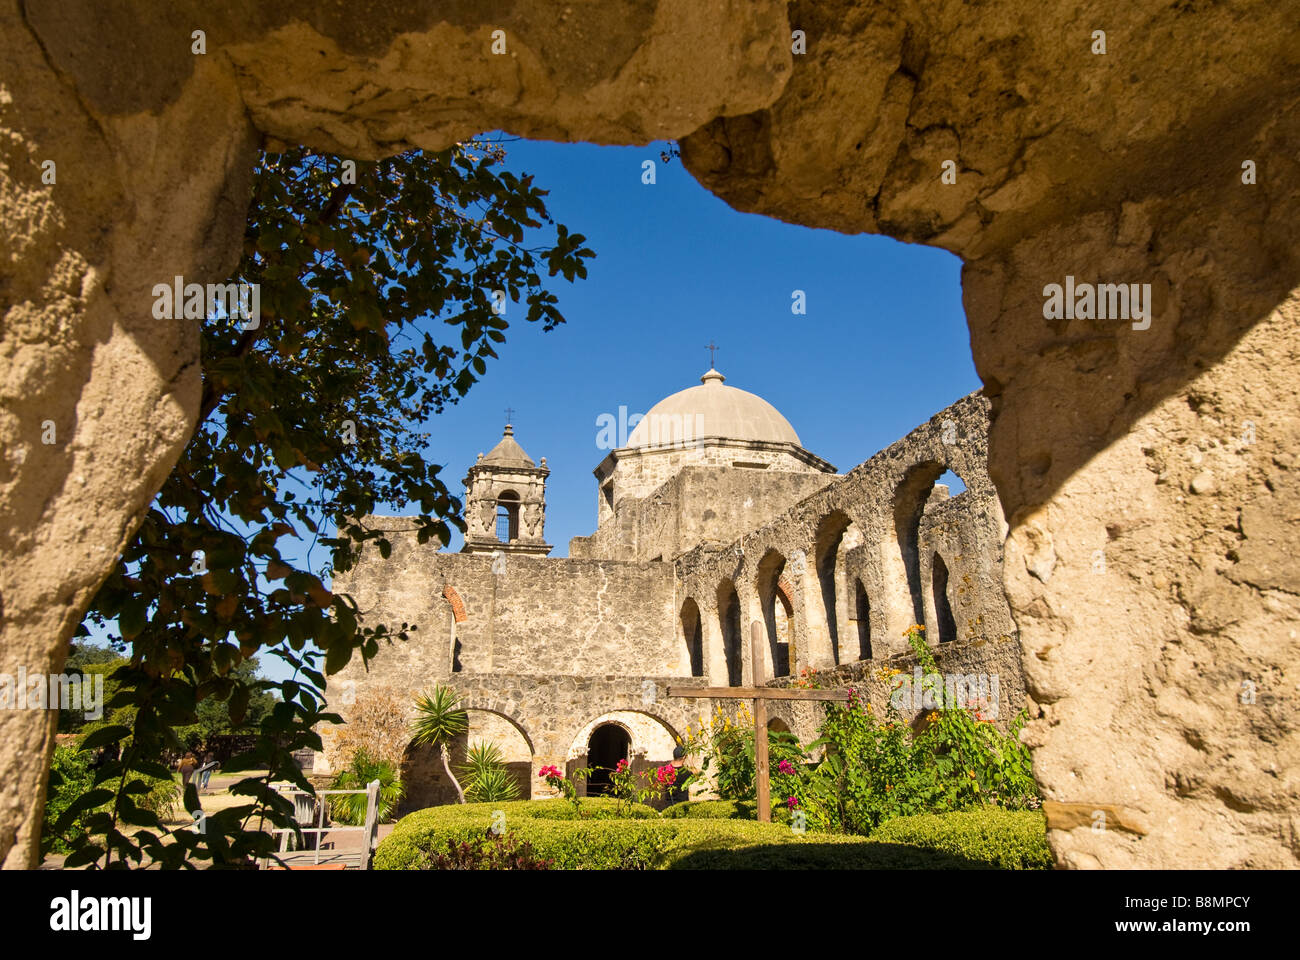 Mission San Jose view through thick stone walls to domed mission church Missions National Park Texas TX Stock Photo